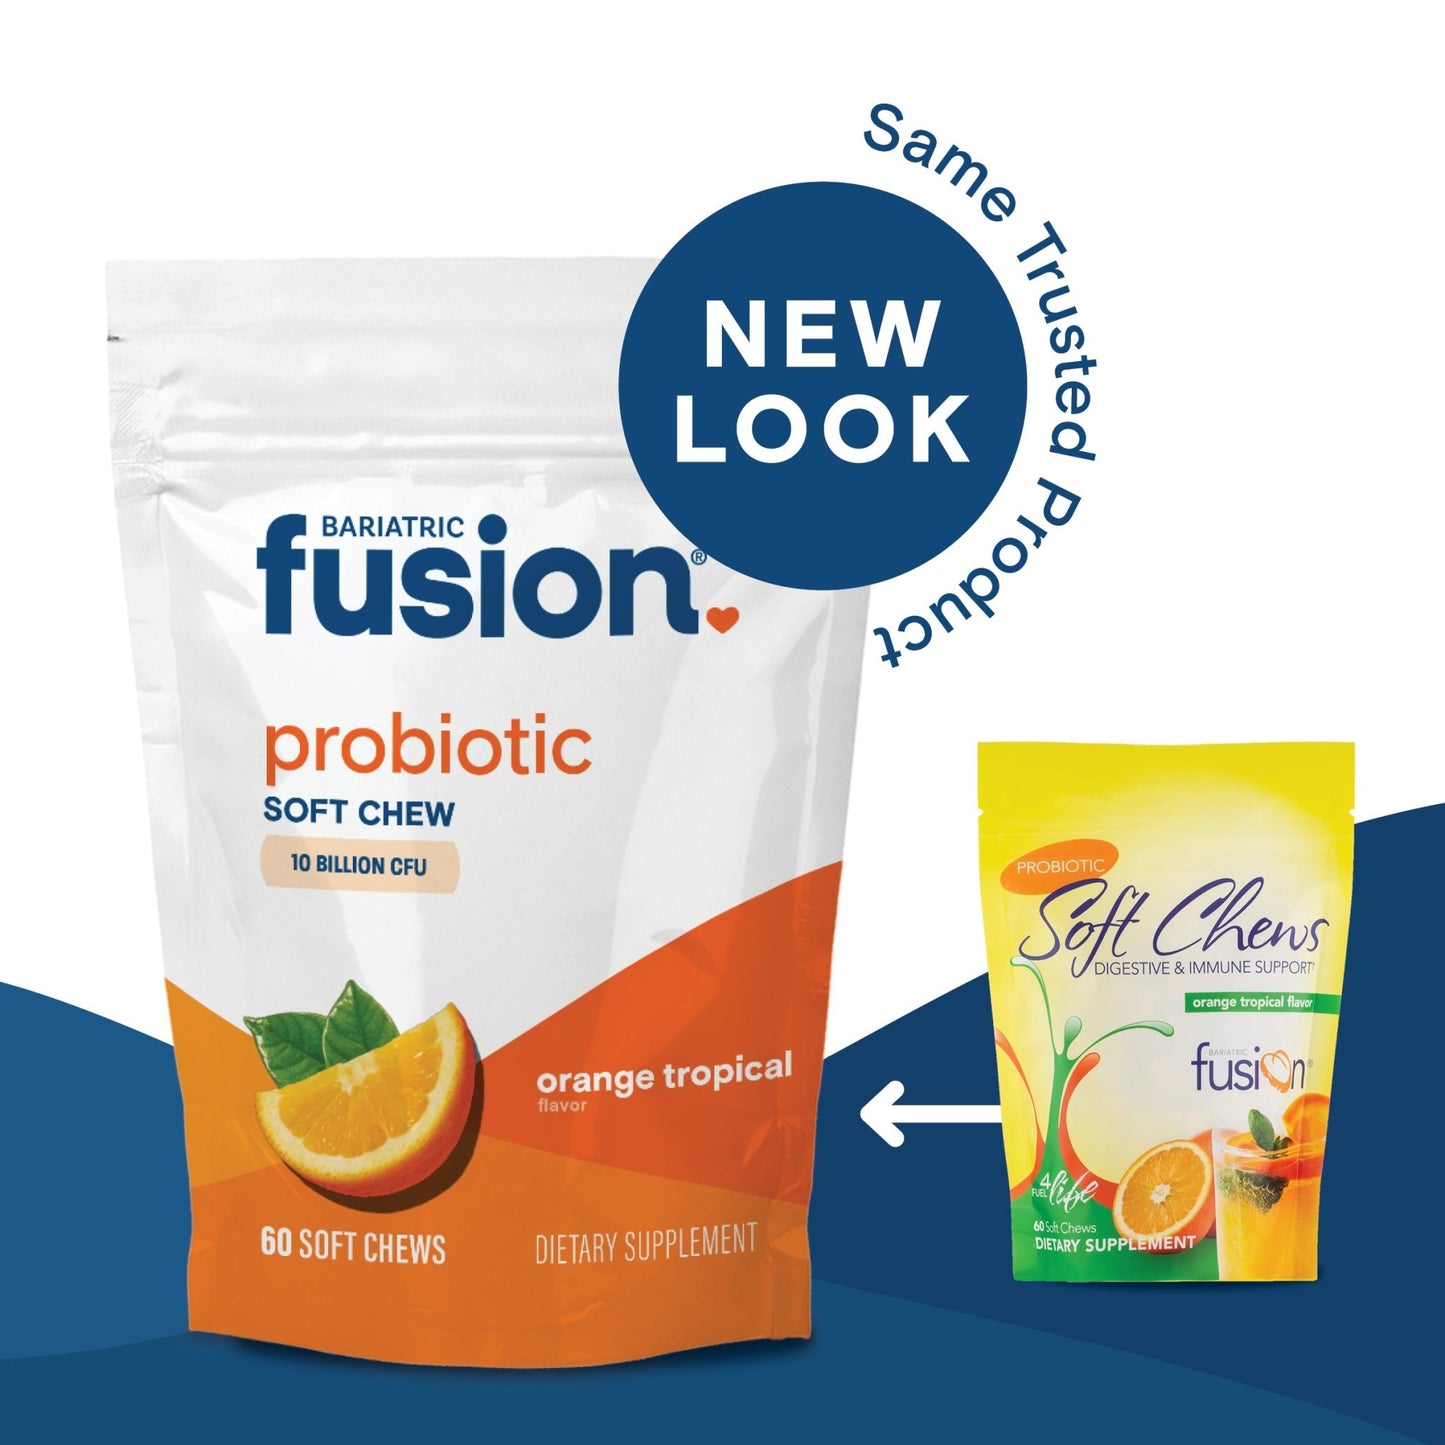 Bariatric Fusion Orange Tropical Probiotic Soft Chew new look, same trusted product.